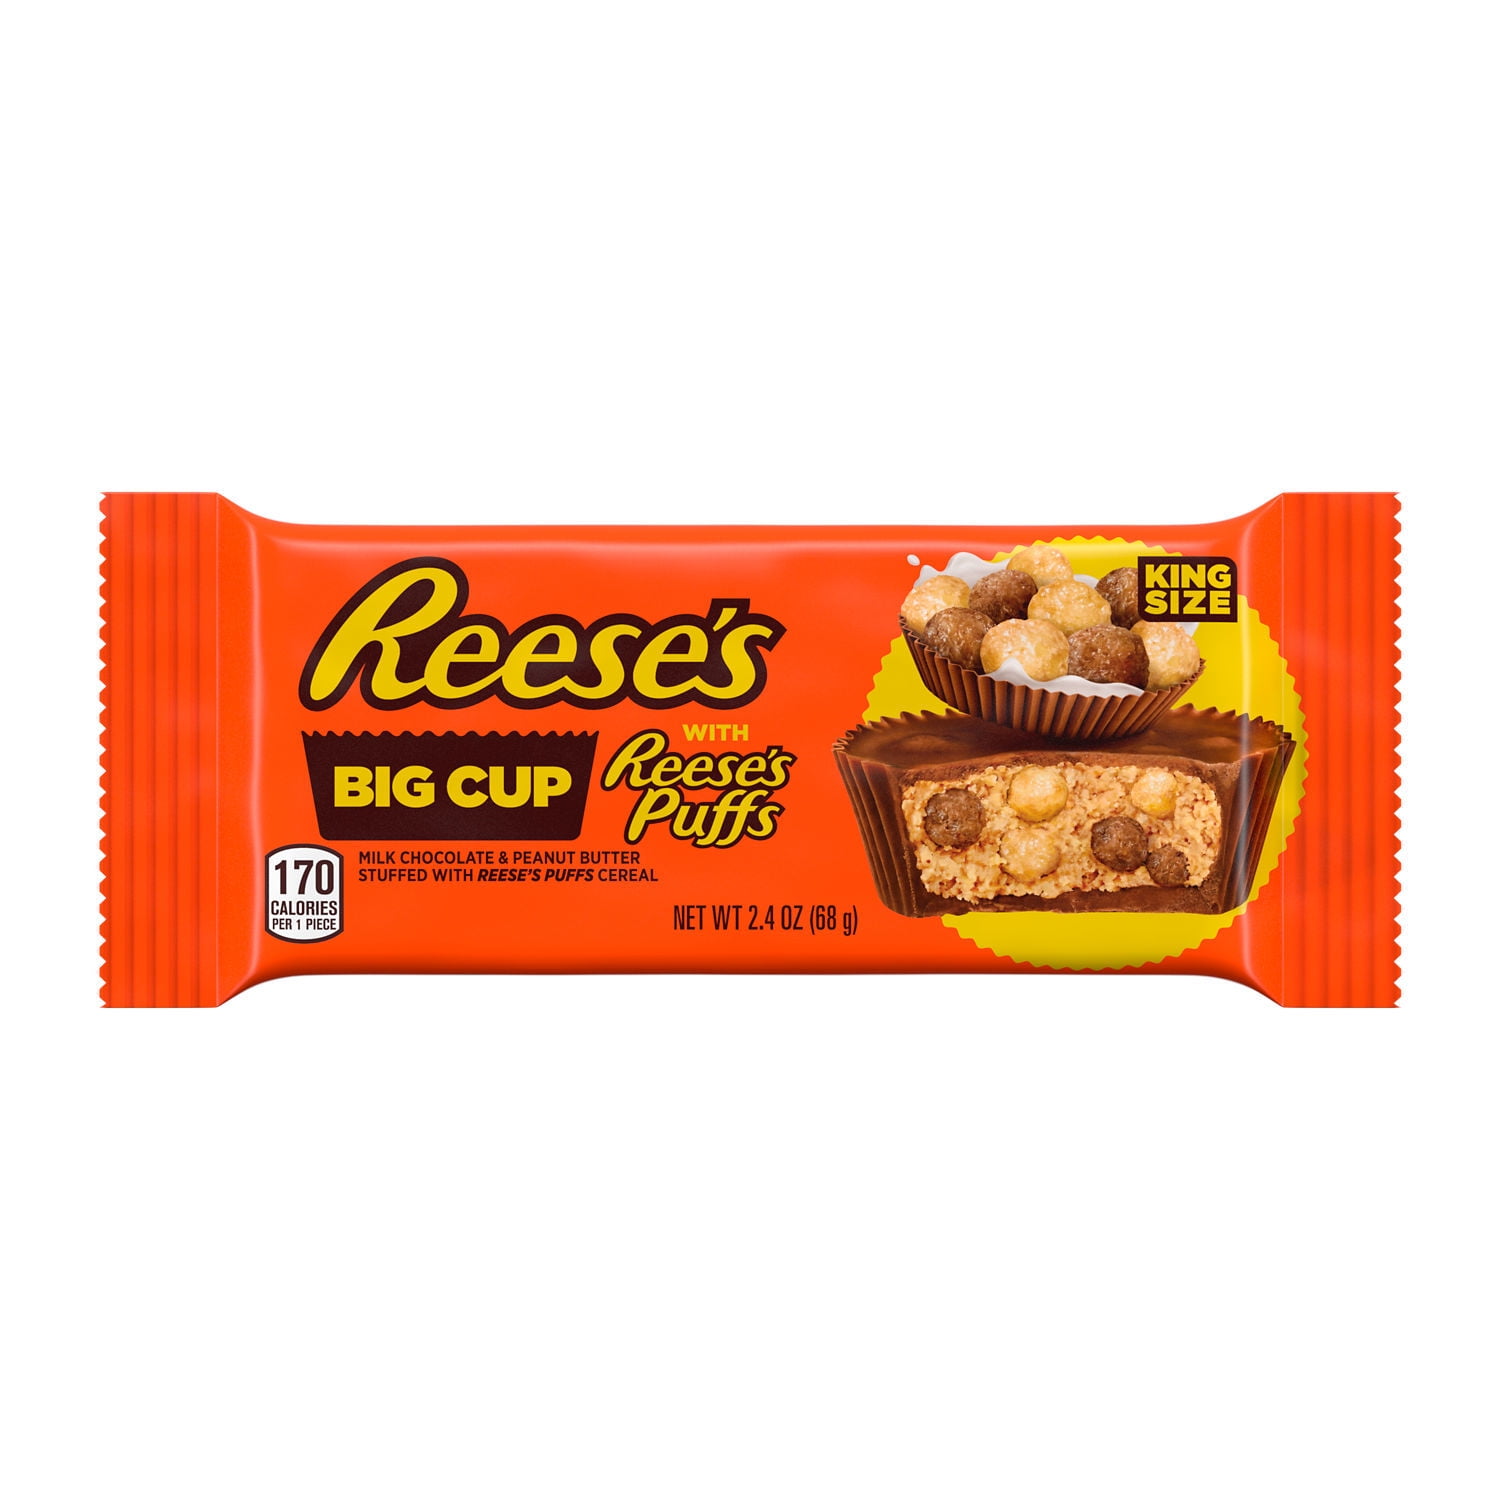 REESE'S, STUFFED WITH REESE'S PUFFS CEREAL Big Cup Milk Chocolate Peanut Butter Cups Candy, Gluten Free, 2.4 oz, King Size Pack